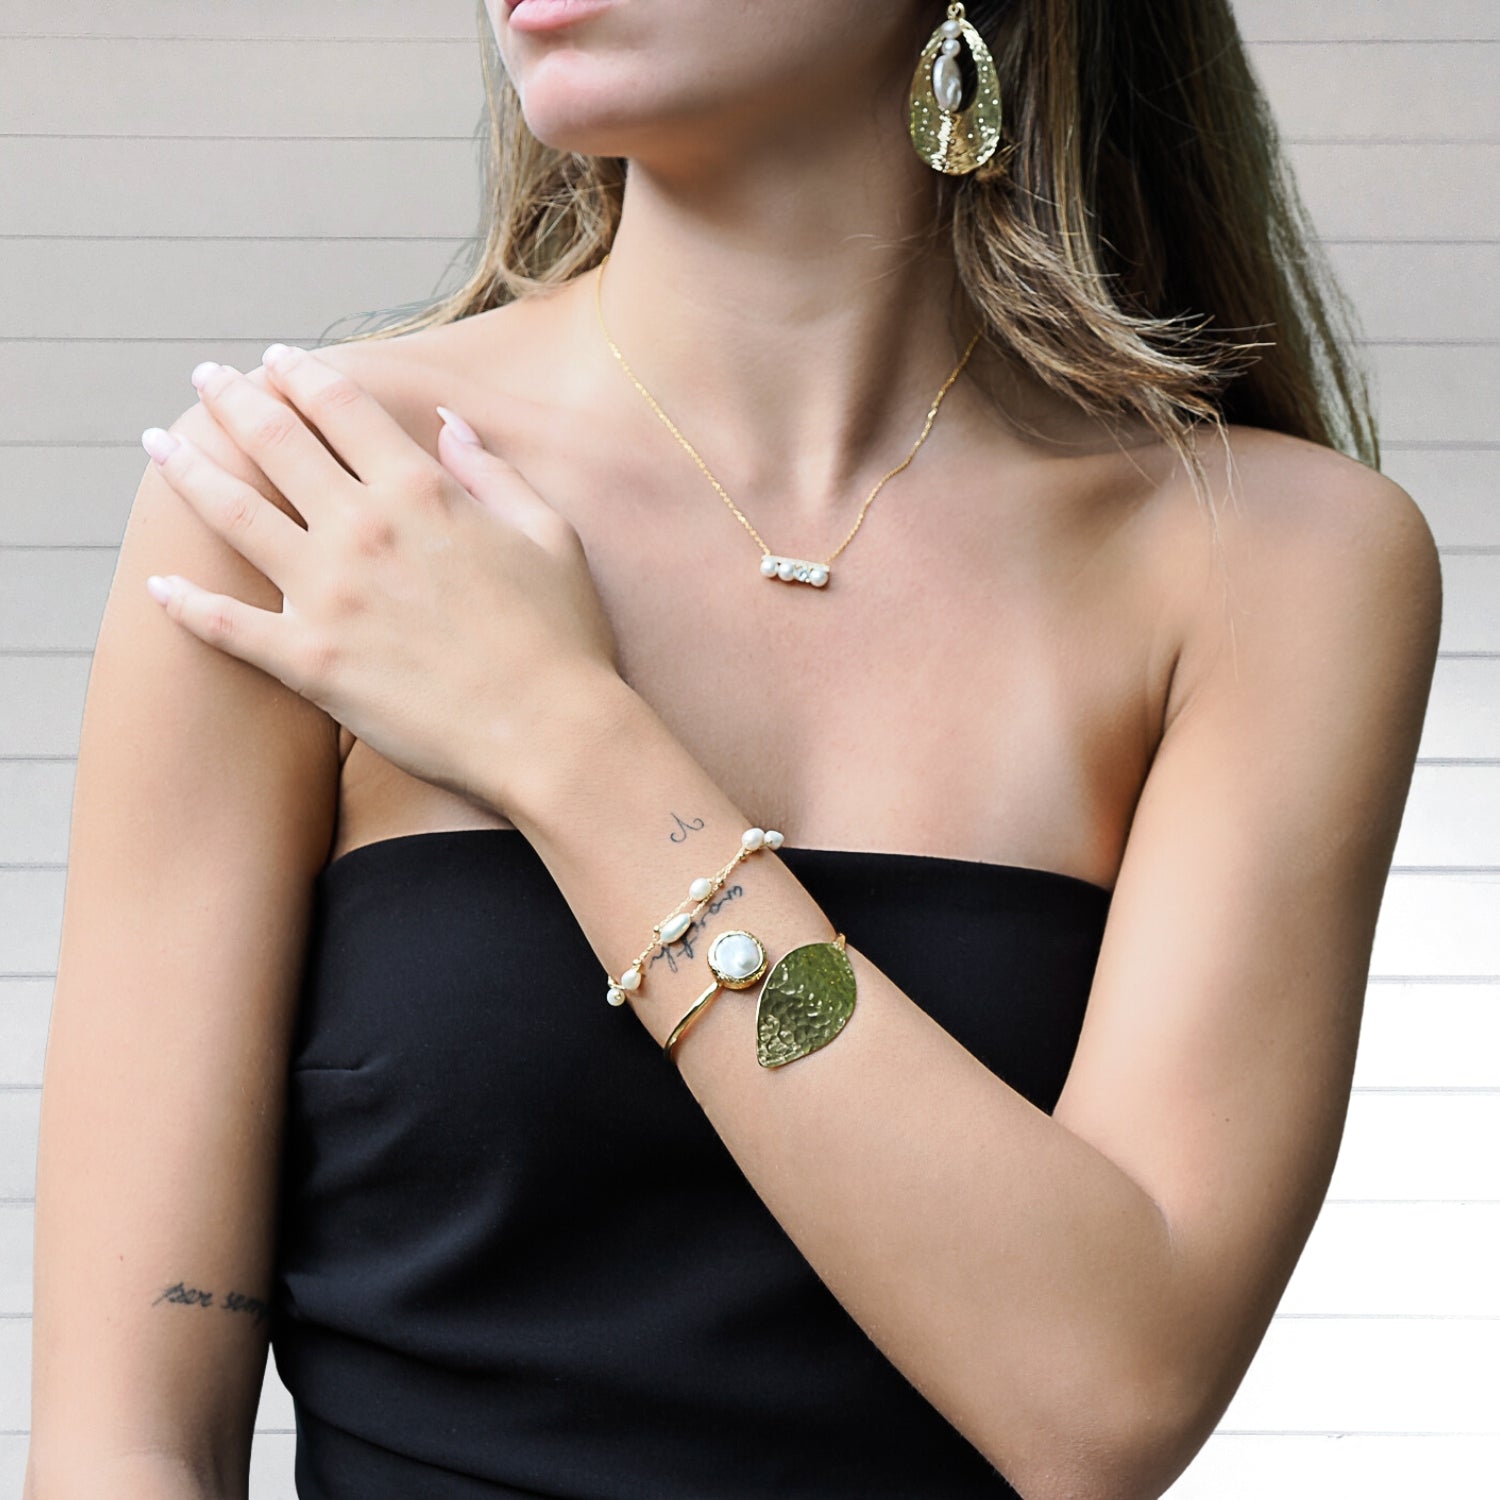 Model shines in luminous luxury with the Gold Leaf Cuff Bracelet.